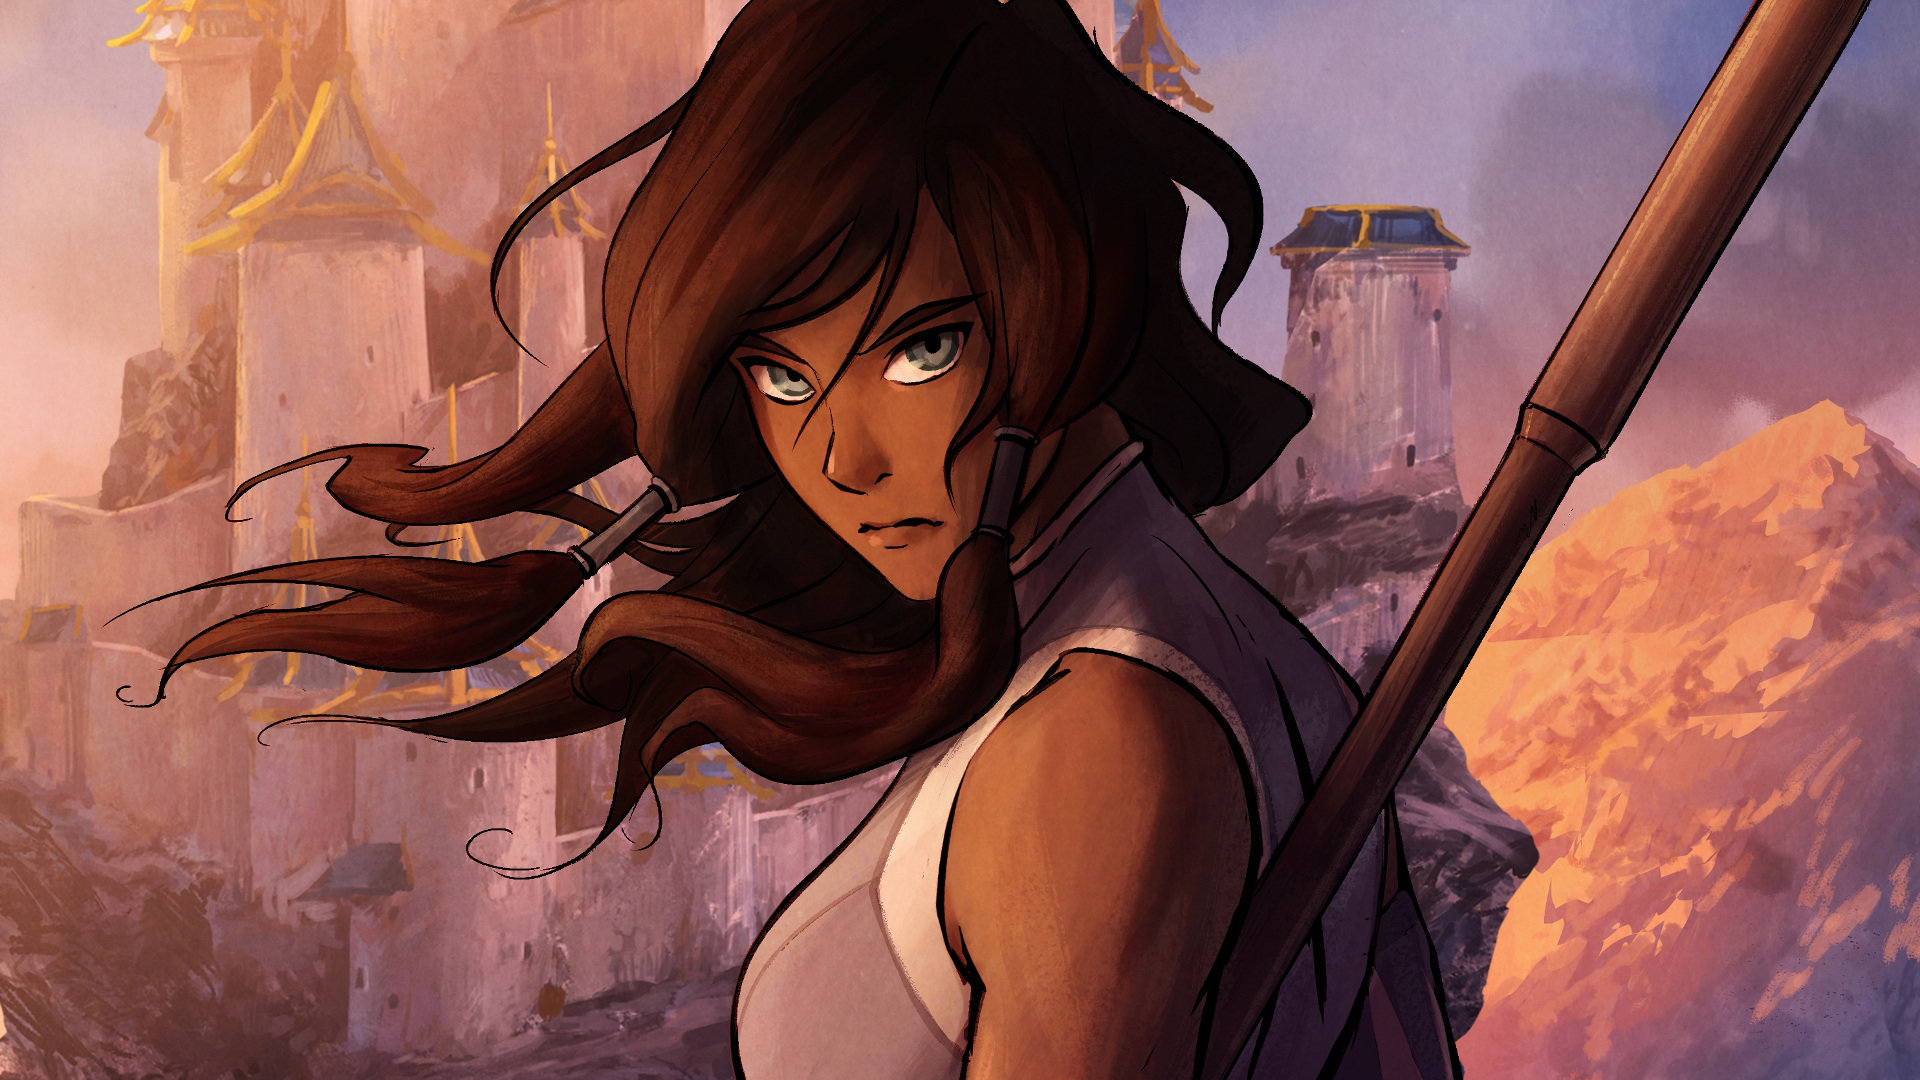 Download full hd 1920x1080 Avatar: The Legend Of Korra computer background ID:243443 for free